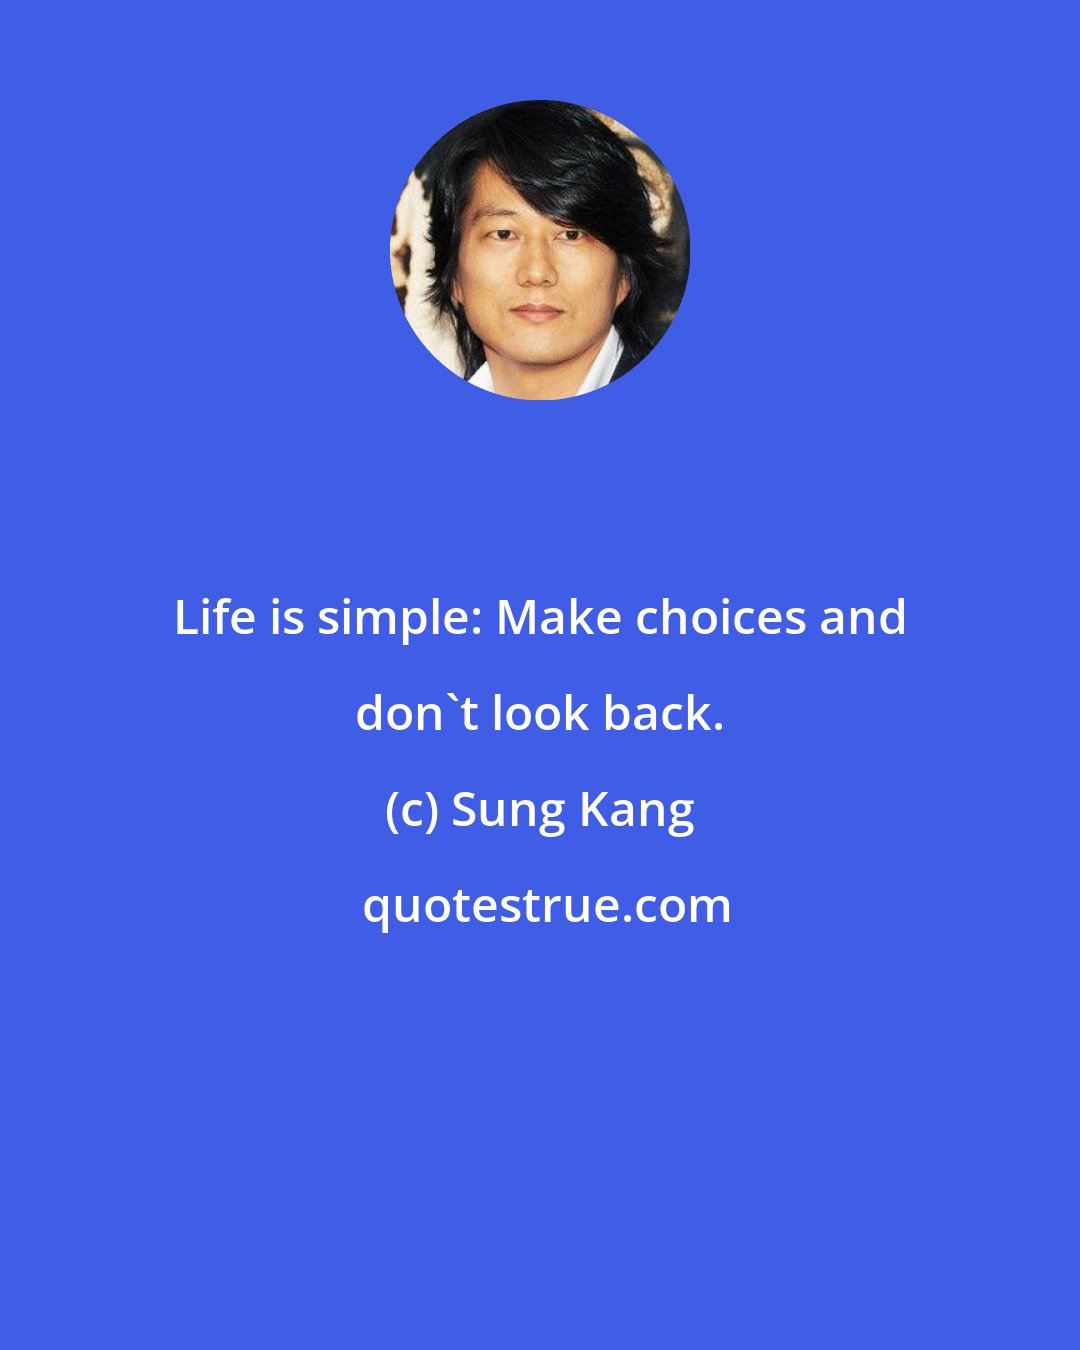 Sung Kang: Life is simple: Make choices and don't look back.